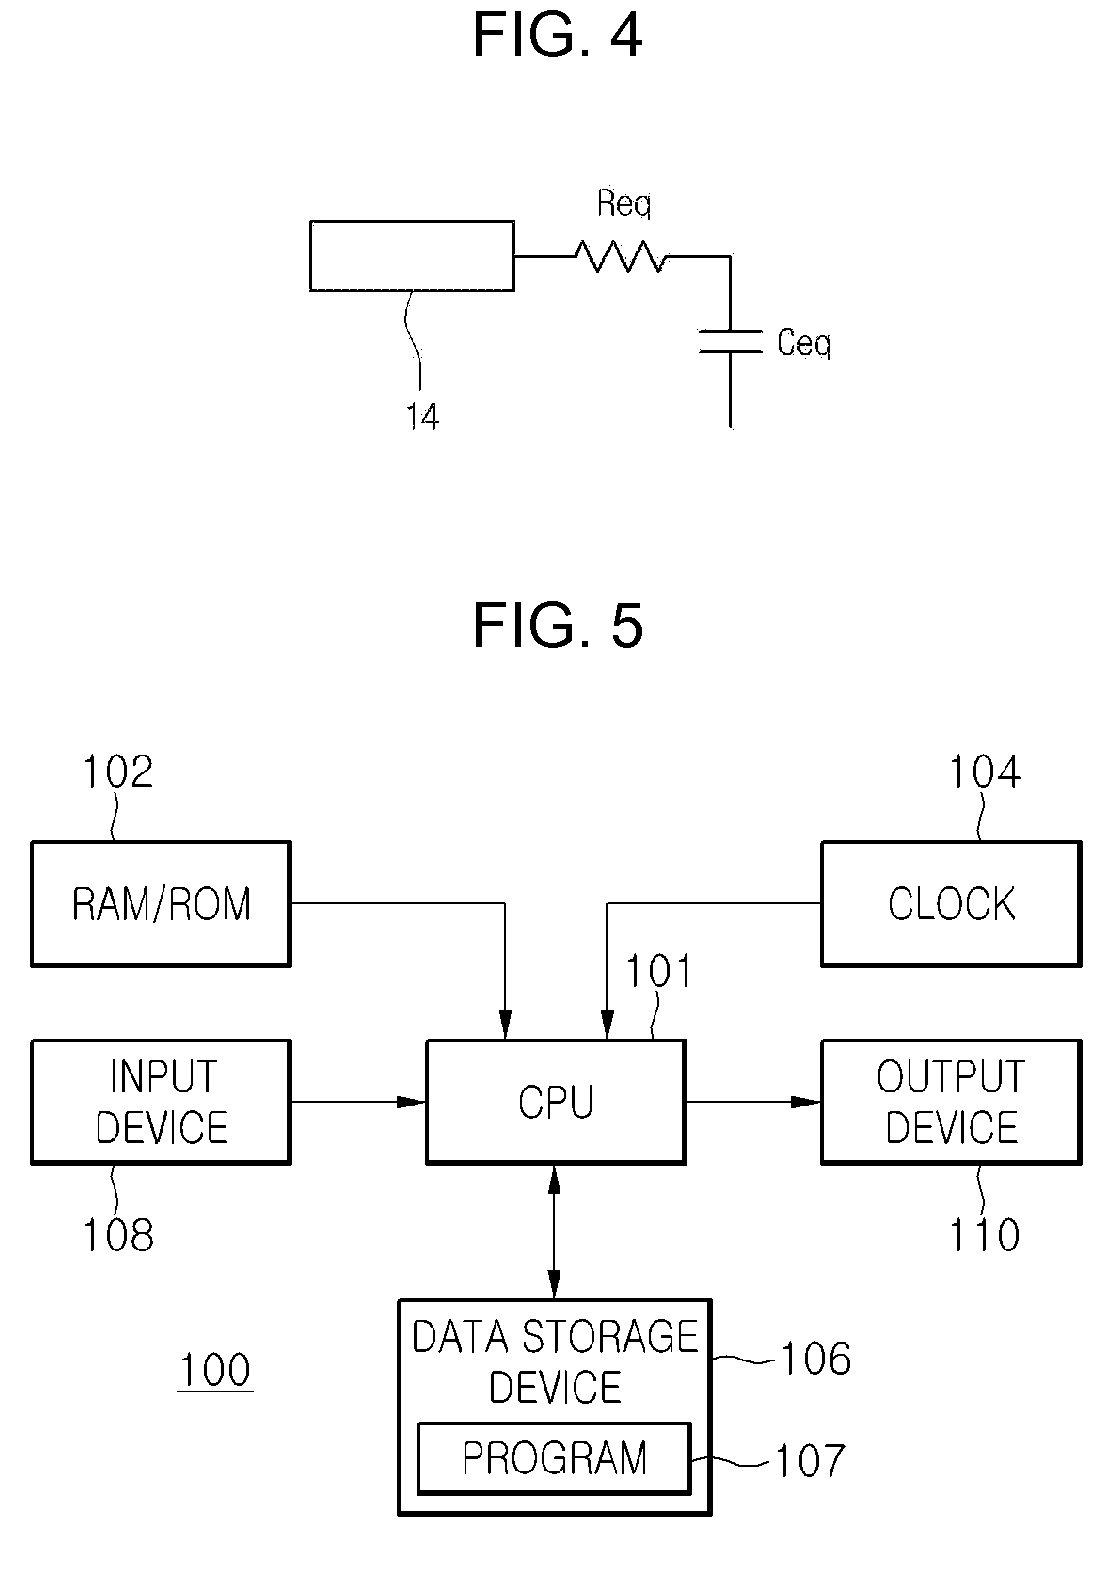 Modeling Method for Evaluating Unit Delay Time of Inverter and Apparatus Thereof